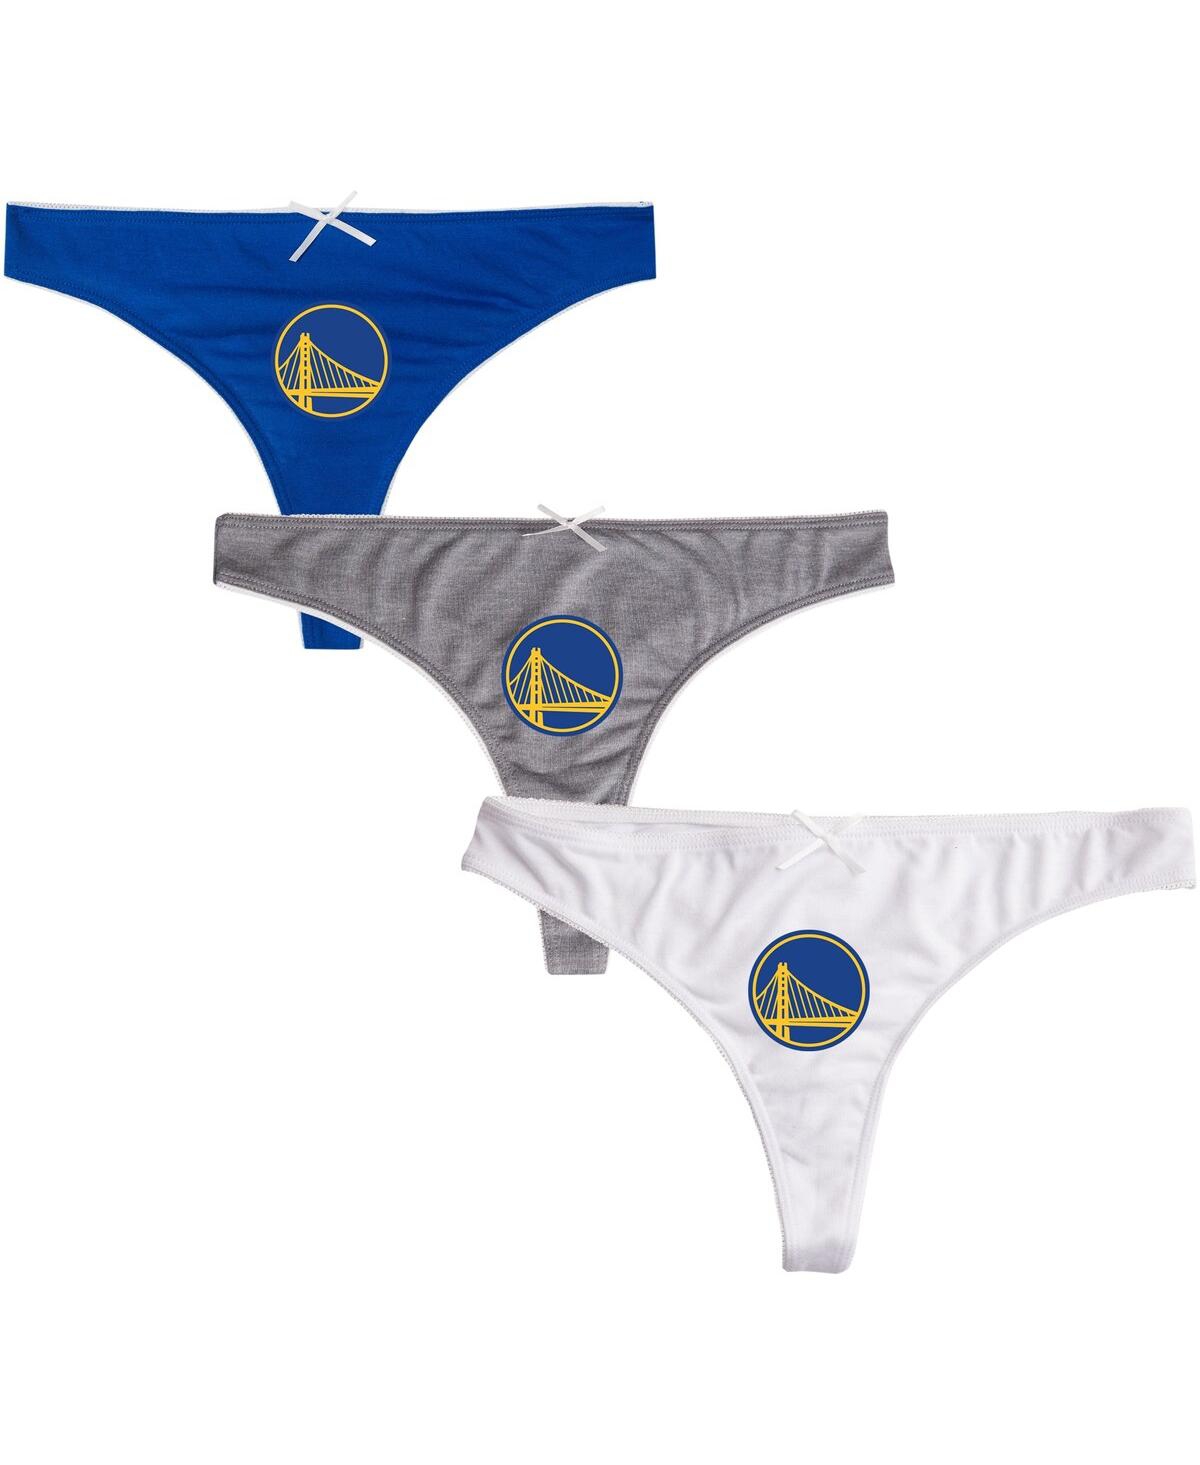 Women's College Concepts Royal, Charcoal, White Golden State Warriors Arctic 3-Pack Thong Set - Royal, Charcoal